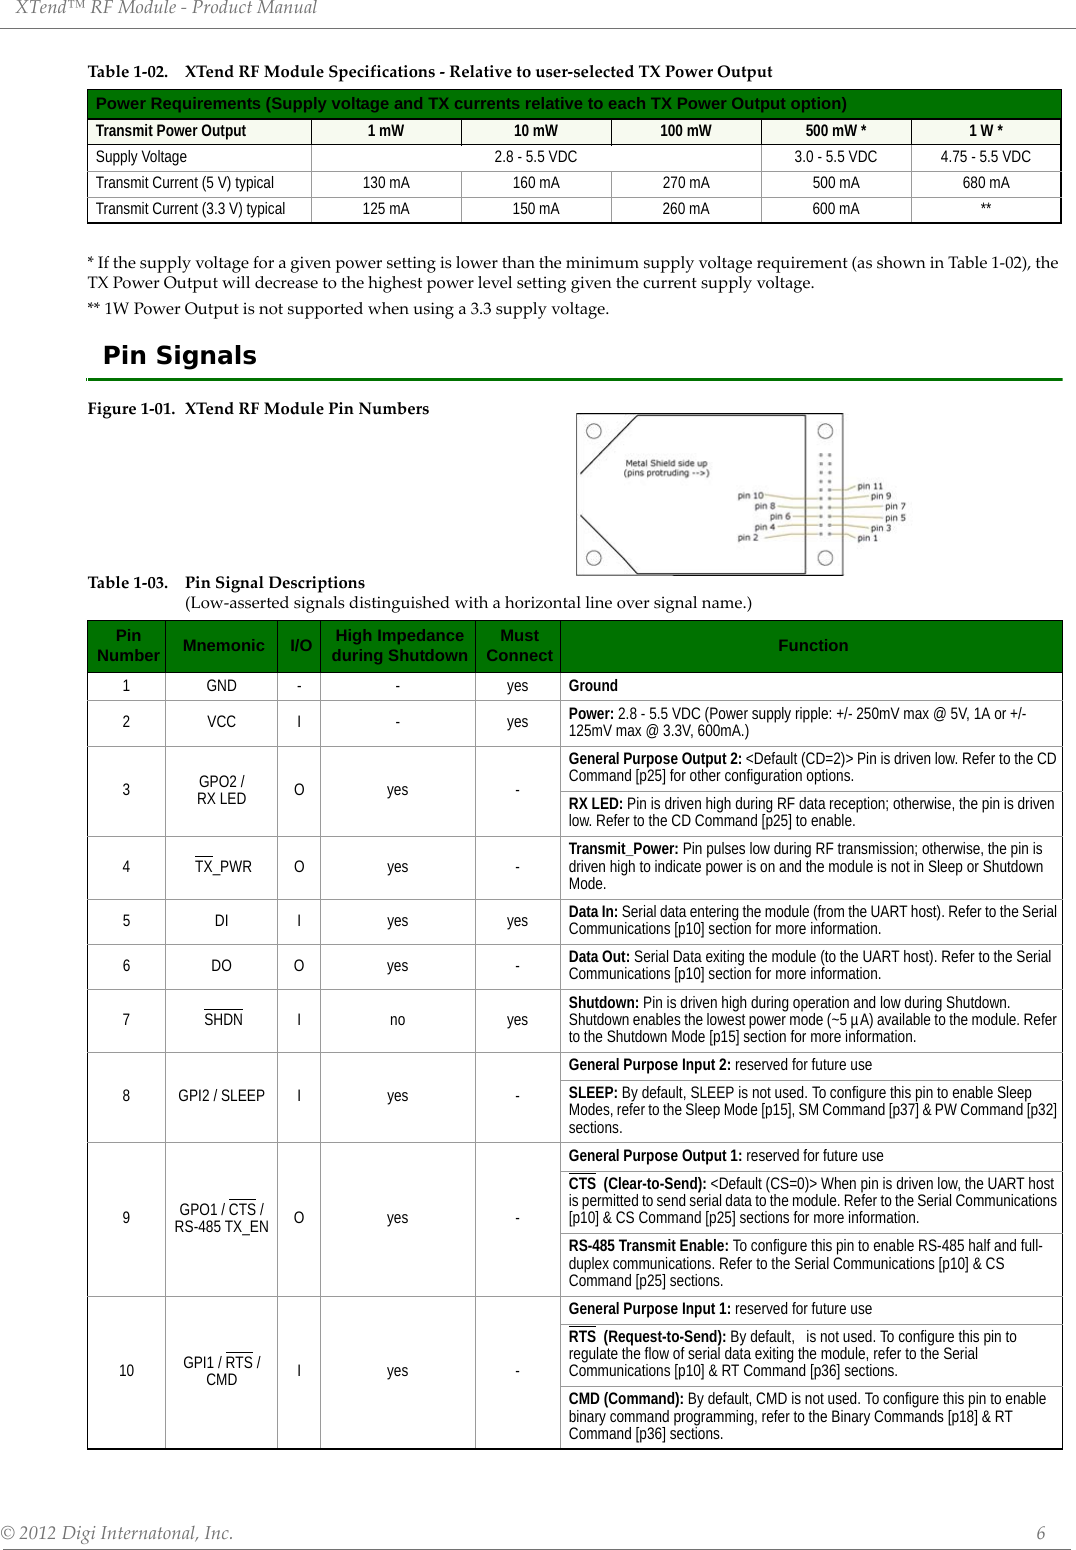 XTend™ RF Module - Product Manual © 2012 Digi Internatonal, Inc.      6* If the supply voltage for a given power setting is lower than the minimum supply voltage requirement (as shown in Table 1-02), the TX Power Output will decrease to the highest power level setting given the current supply voltage.** 1W Power Output is not supported when using a 3.3 supply voltage.Pin SignalsFigure 1-01. XTend RF Module Pin Numbers  Table 1-02. XTend RF Module Specifications - Relative to user-selected TX Power OutputPower Requirements (Supply voltage and TX currents relative to each TX Power Output option)Transmit Power Output 1 mW 10 mW 100 mW 500 mW * 1 W *Supply Voltage 2.8 - 5.5 VDC 3.0 - 5.5 VDC 4.75 - 5.5 VDCTransmit Current (5 V) typical 130 mA 160 mA 270 mA 500 mA 680 mATransmit Current (3.3 V) typical 125 mA 150 mA 260 mA 600 mA **Table 1-03. Pin Signal Descriptions (Low-asserted signals distinguished with a horizontal line over signal name.)Pin Number Mnemonic I/O High Impedance during Shutdown Must Connect Function1GND- - yesGround2VCCI - yesPower: 2.8 - 5.5 VDC (Power supply ripple: +/- 250mV max @ 5V, 1A or +/- 125mV max @ 3.3V, 600mA.)3GPO2 / RX LED Oyes -General Purpose Output 2: &lt;Default (CD=2)&gt; Pin is driven low. Refer to the CD Command [p25] for other configuration options.RX LED: Pin is driven high during RF data reception; otherwise, the pin is driven low. Refer to the CD Command [p25] to enable.4 TX_PWR O yes - Transmit_Power: Pin pulses low during RF transmission; otherwise, the pin is driven high to indicate power is on and the module is not in Sleep or Shutdown Mode.5DIIyes yesData In: Serial data entering the module (from the UART host). Refer to the Serial Communications [p10] section for more information.6DOOyes -Data Out: Serial Data exiting the module (to the UART host). Refer to the Serial Communications [p10] section for more information.7 SHDNIno yesShutdown: Pin is driven high during operation and low during Shutdown. Shutdown enables the lowest power mode (~5 µA) available to the module. Refer to the Shutdown Mode [p15] section for more information.8 GPI2 / SLEEP I yes -General Purpose Input 2: reserved for future useSLEEP: By default, SLEEP is not used. To configure this pin to enable Sleep Modes, refer to the Sleep Mode [p15], SM Command [p37] &amp; PW Command [p32] sections.9GPO1 / CTS / RS-485 TX_EN Oyes -General Purpose Output 1: reserved for future useCTS  (Clear-to-Send): &lt;Default (CS=0)&gt; When pin is driven low, the UART host is permitted to send serial data to the module. Refer to the Serial Communications [p10] &amp; CS Command [p25] sections for more information.RS-485 Transmit Enable: To configure this pin to enable RS-485 half and full-duplex communications. Refer to the Serial Communications [p10] &amp; CS Command [p25] sections.10 GPI1 / RTS / CMD Iyes -General Purpose Input 1: reserved for future useRTS  (Request-to-Send): By default,   is not used. To configure this pin to regulate the flow of serial data exiting the module, refer to the Serial Communications [p10] &amp; RT Command [p36] sections.CMD (Command): By default, CMD is not used. To configure this pin to enable binary command programming, refer to the Binary Commands [p18] &amp; RT Command [p36] sections.